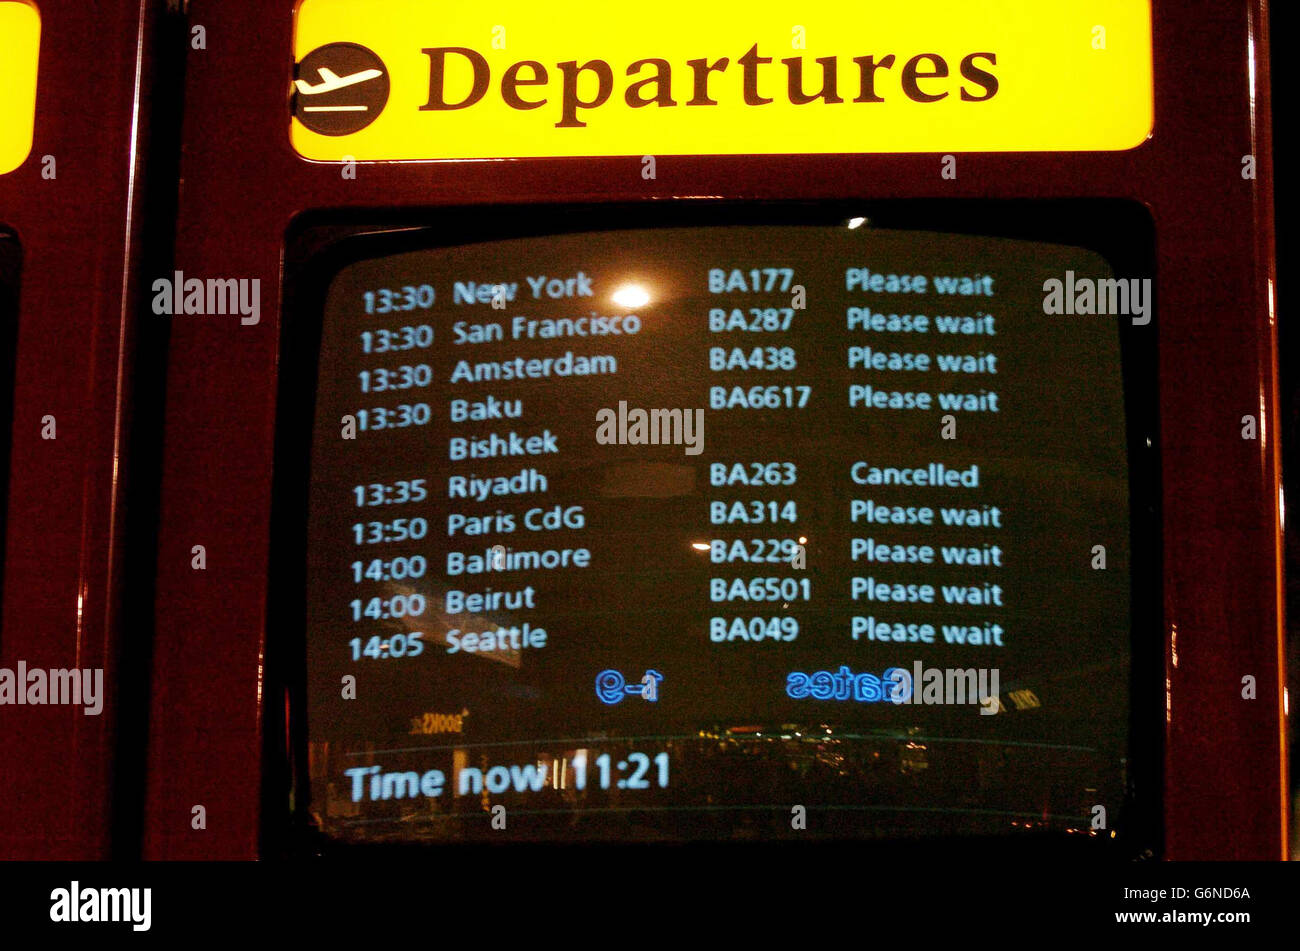 The departure monitor at London's Heathrow Airport displays the cancellation of flight BA263 to Riyadh. The cancellation came as British Airways flight BA223 to Washington was given the all clear to depart as normal. The clearance for the flight came after the airline was forced to cancel it two days running because of fears over security. Stock Photo